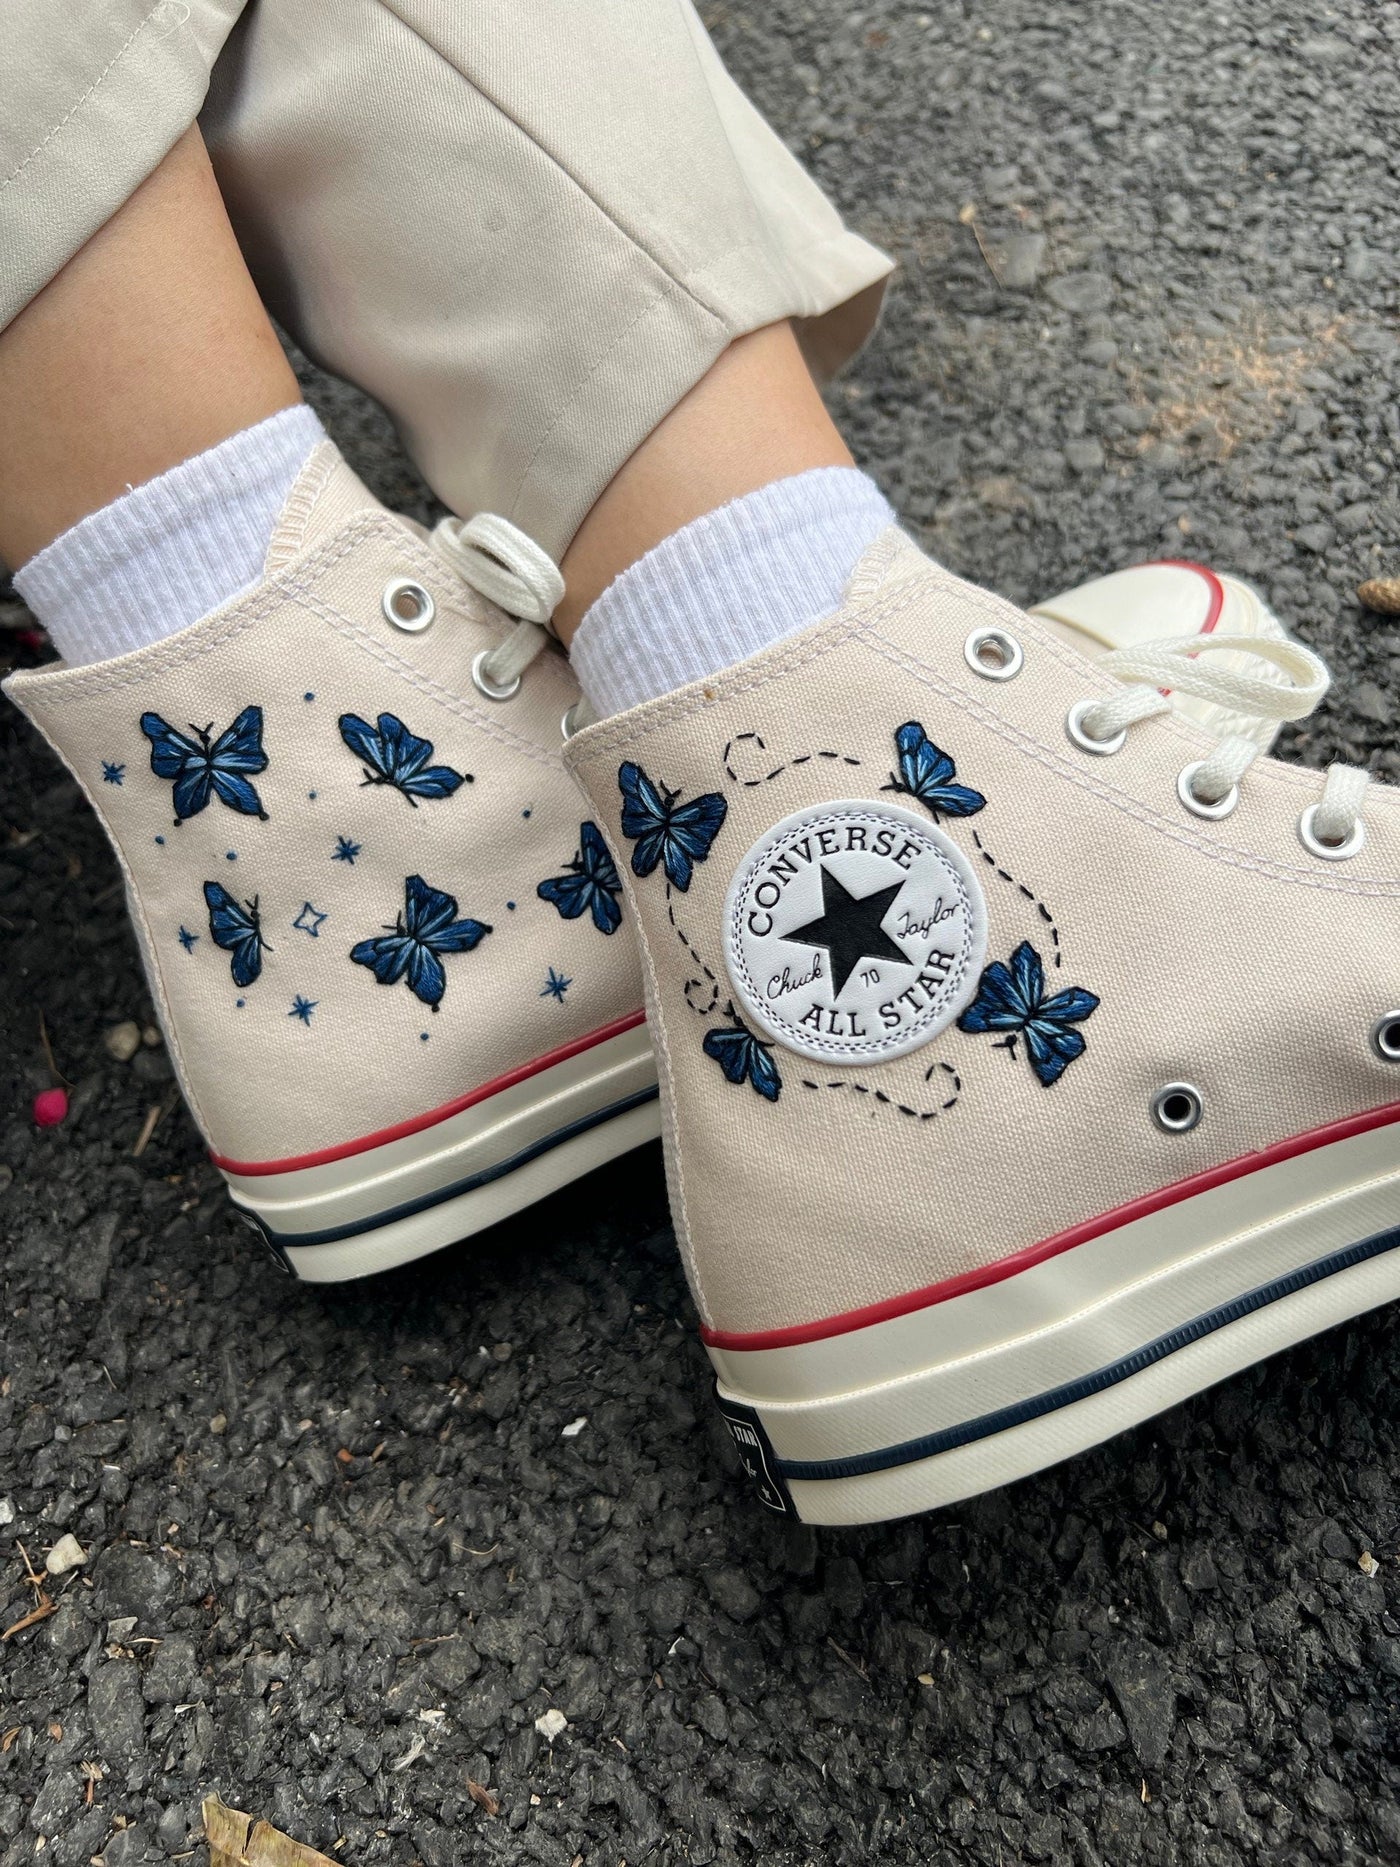 Embroidered Converse,Butterfly Converse,Embroidered Blue Butterflies